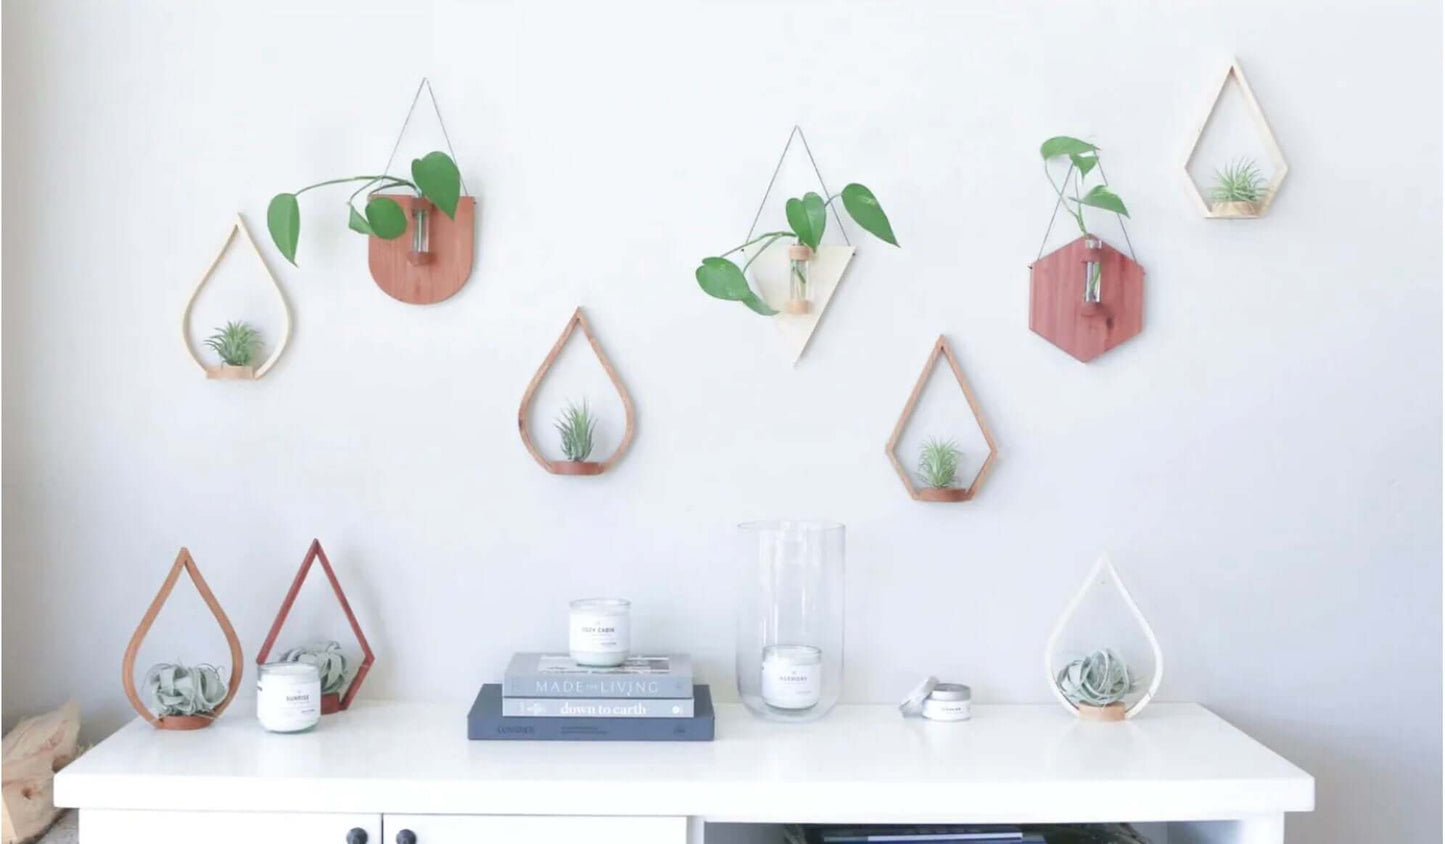 Eco-friendly handcrafted plant holders